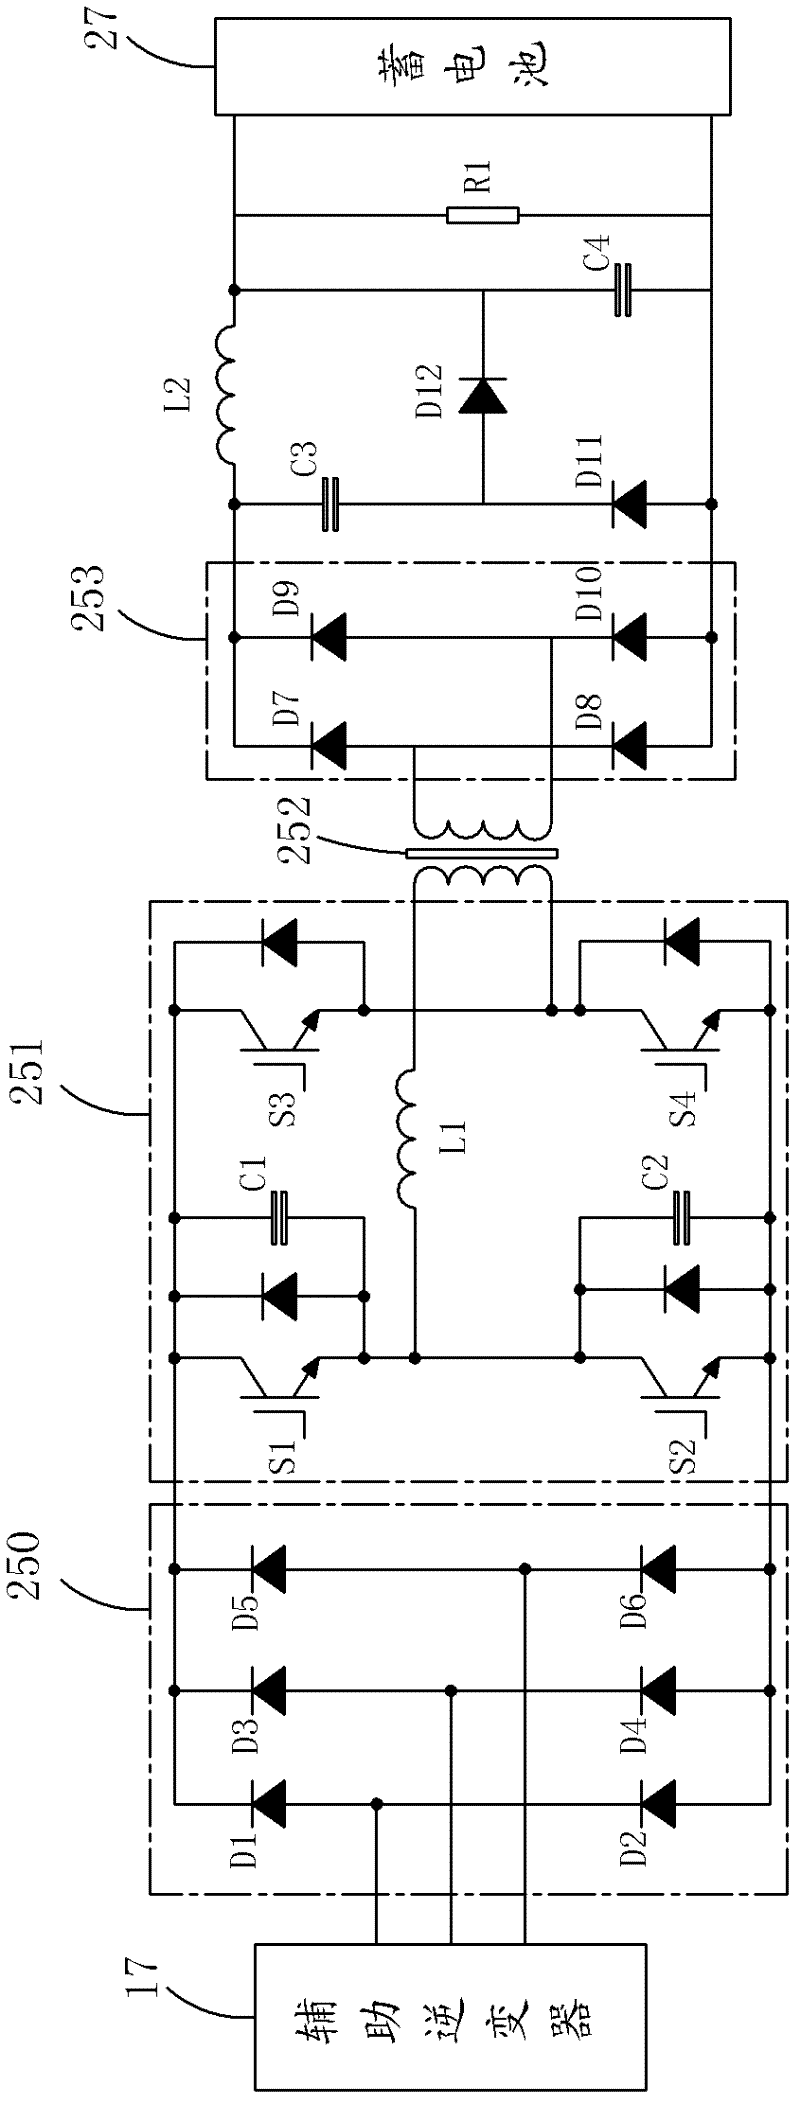 Power supply system for electric locomotive